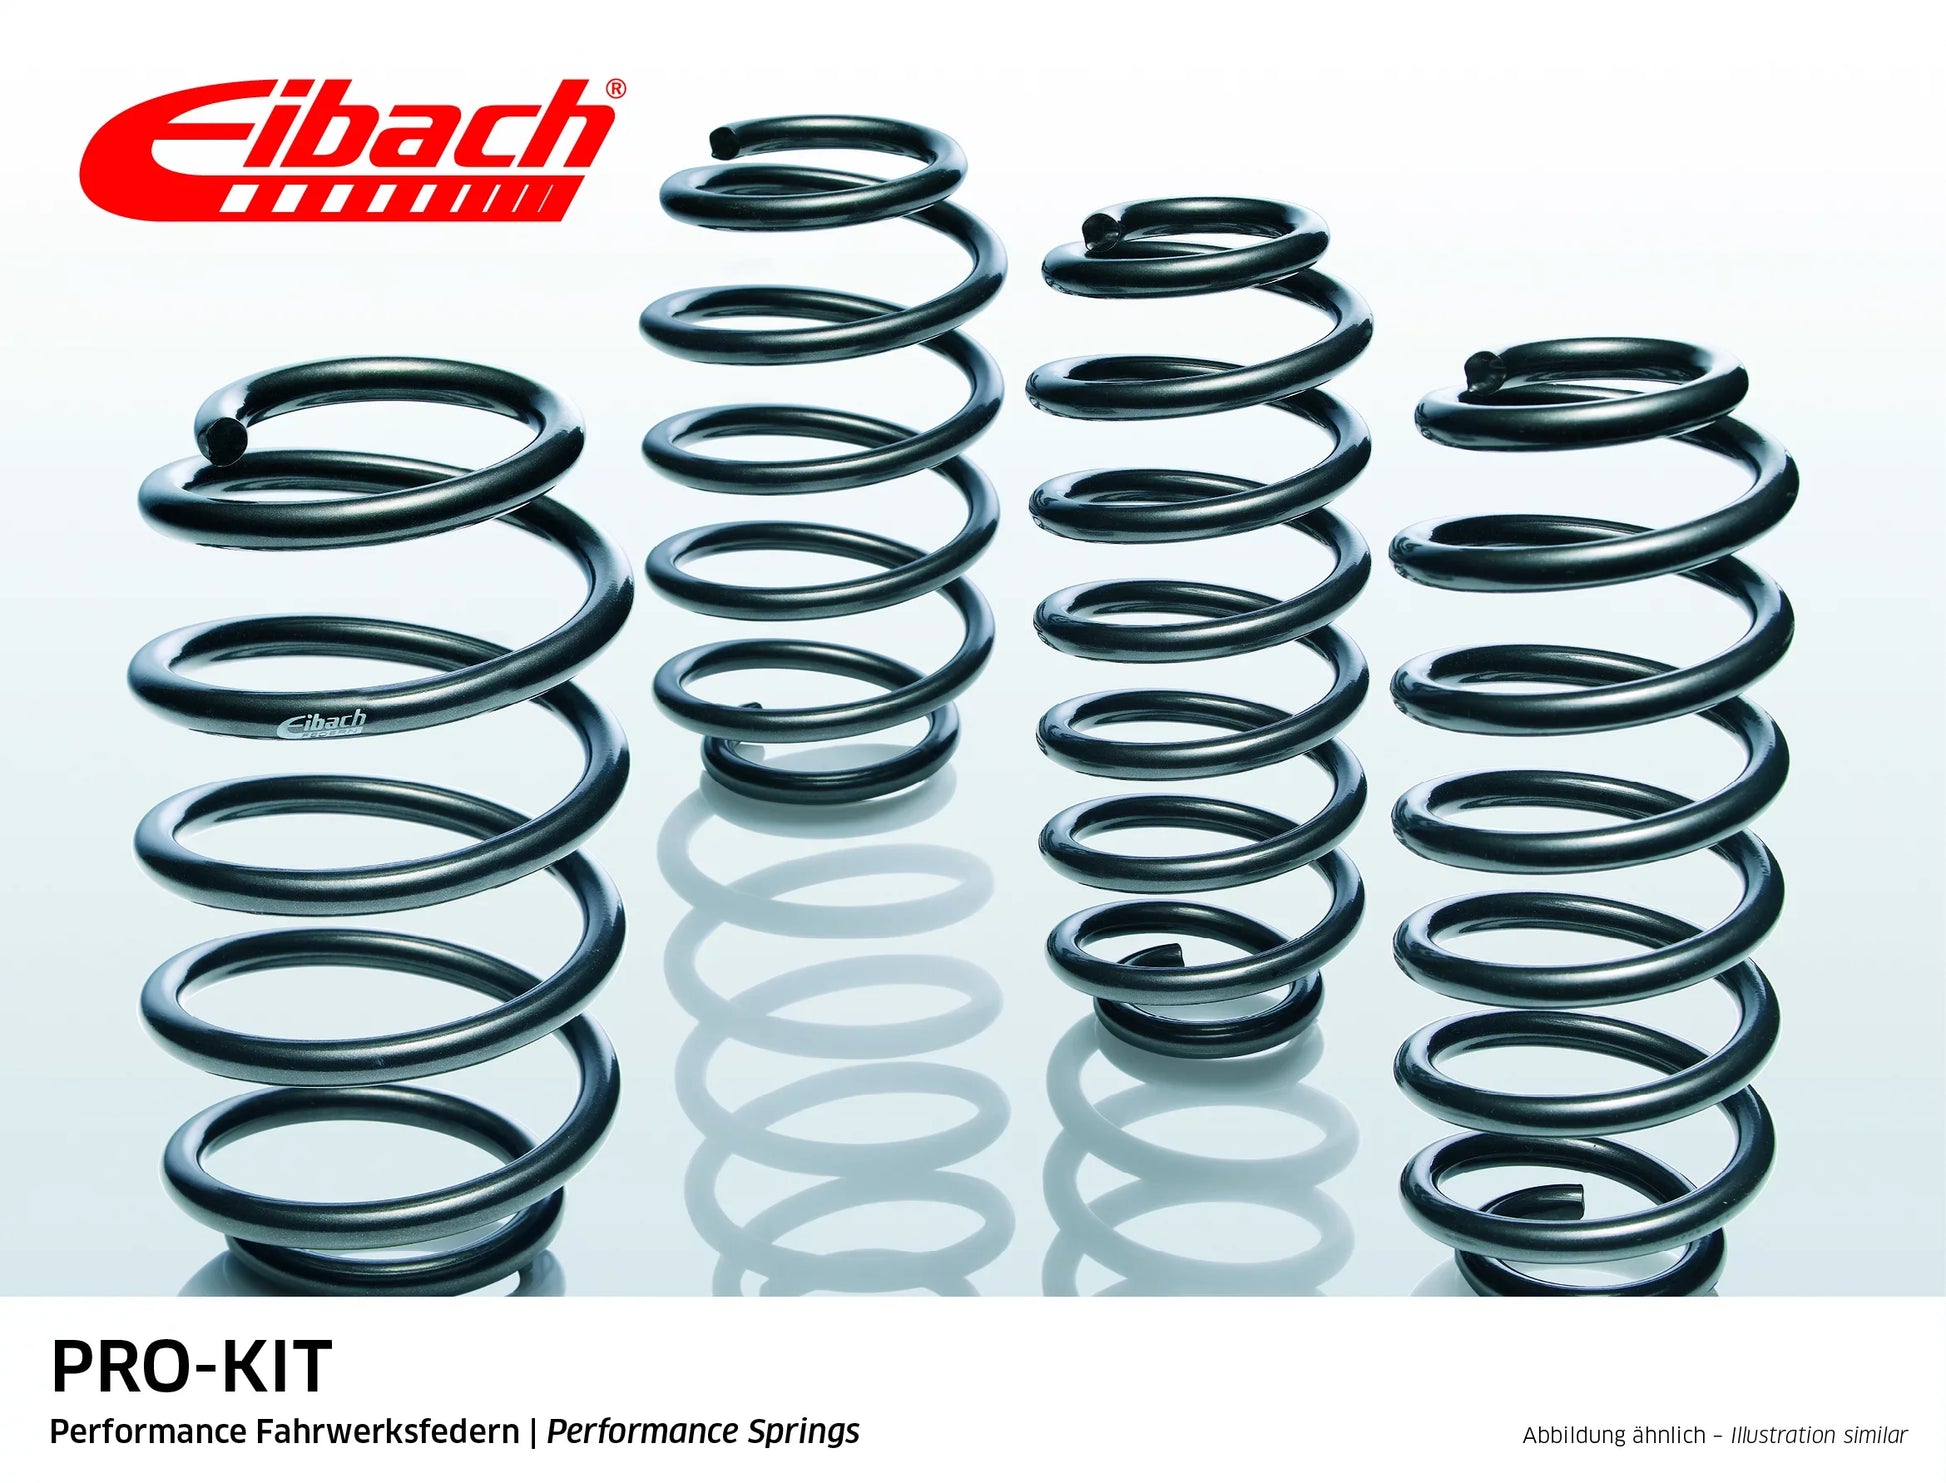 Eibach Pro-Kit Lowering Springs (E10-35-016-09-22) at £283.00